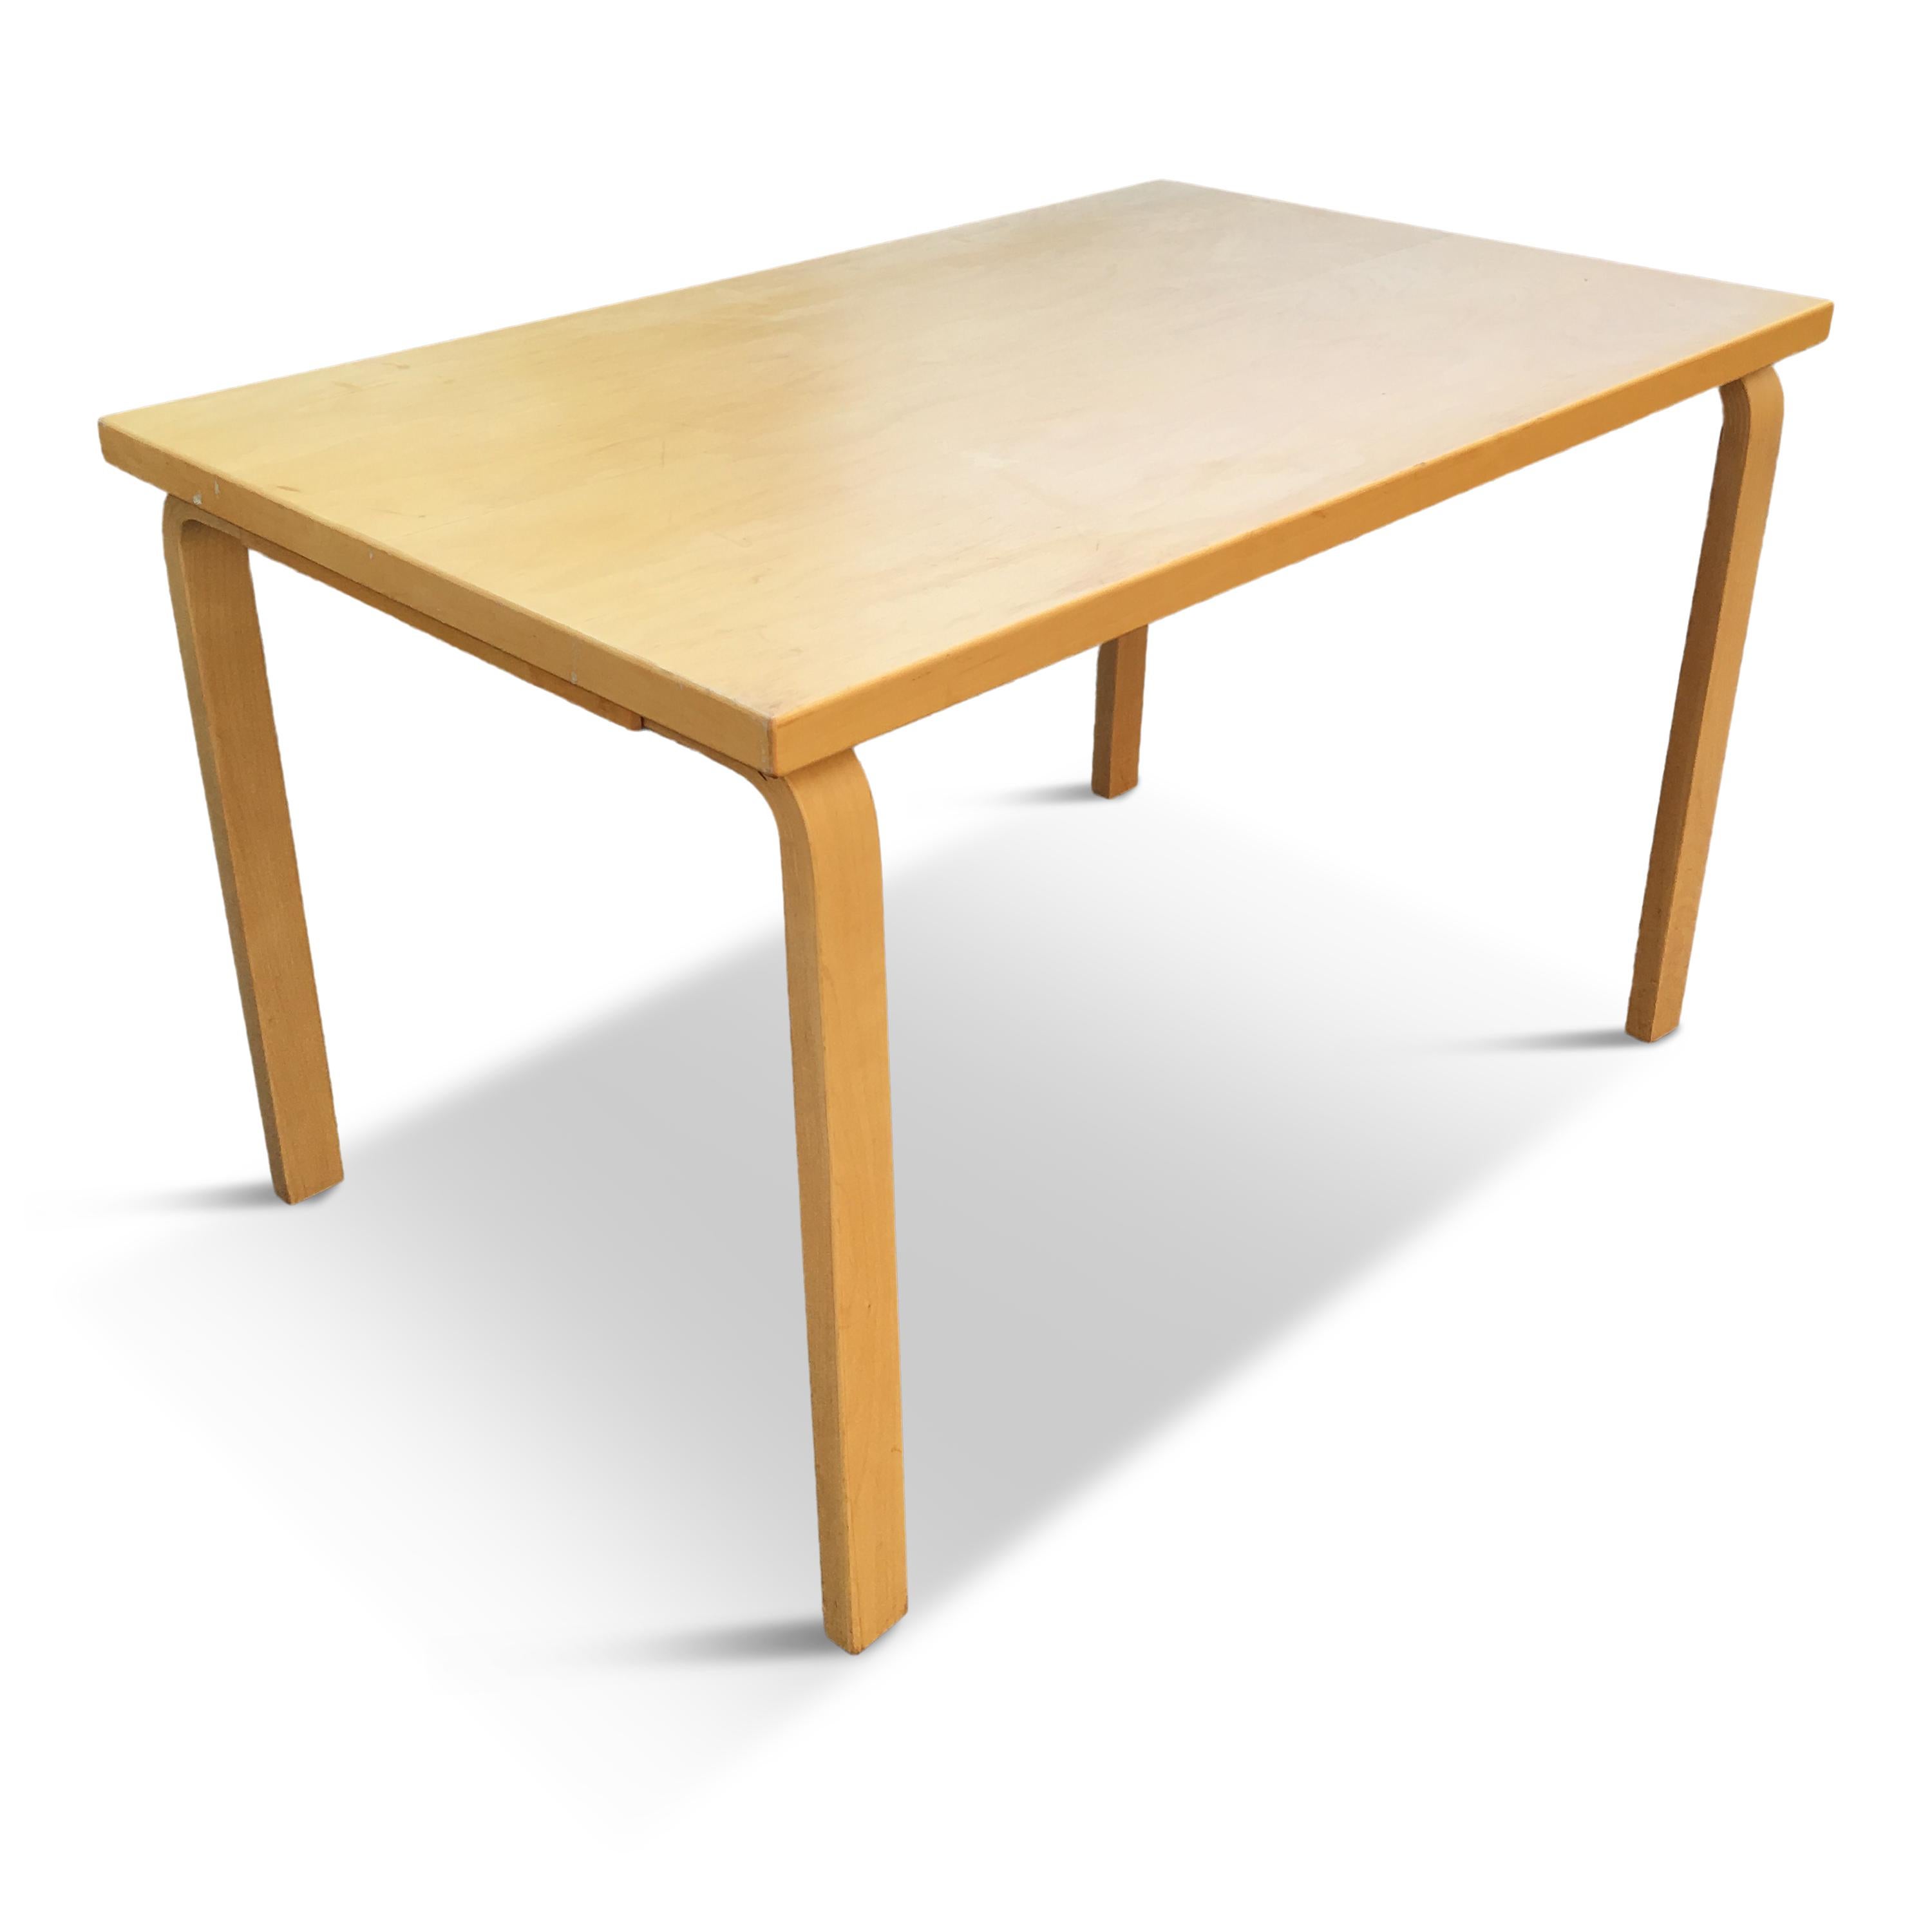 This table model 81B was designed by Alvar Aalto in 1935, production by Artek Finland during 1970s.
It is made of birch wood.
Design classics!